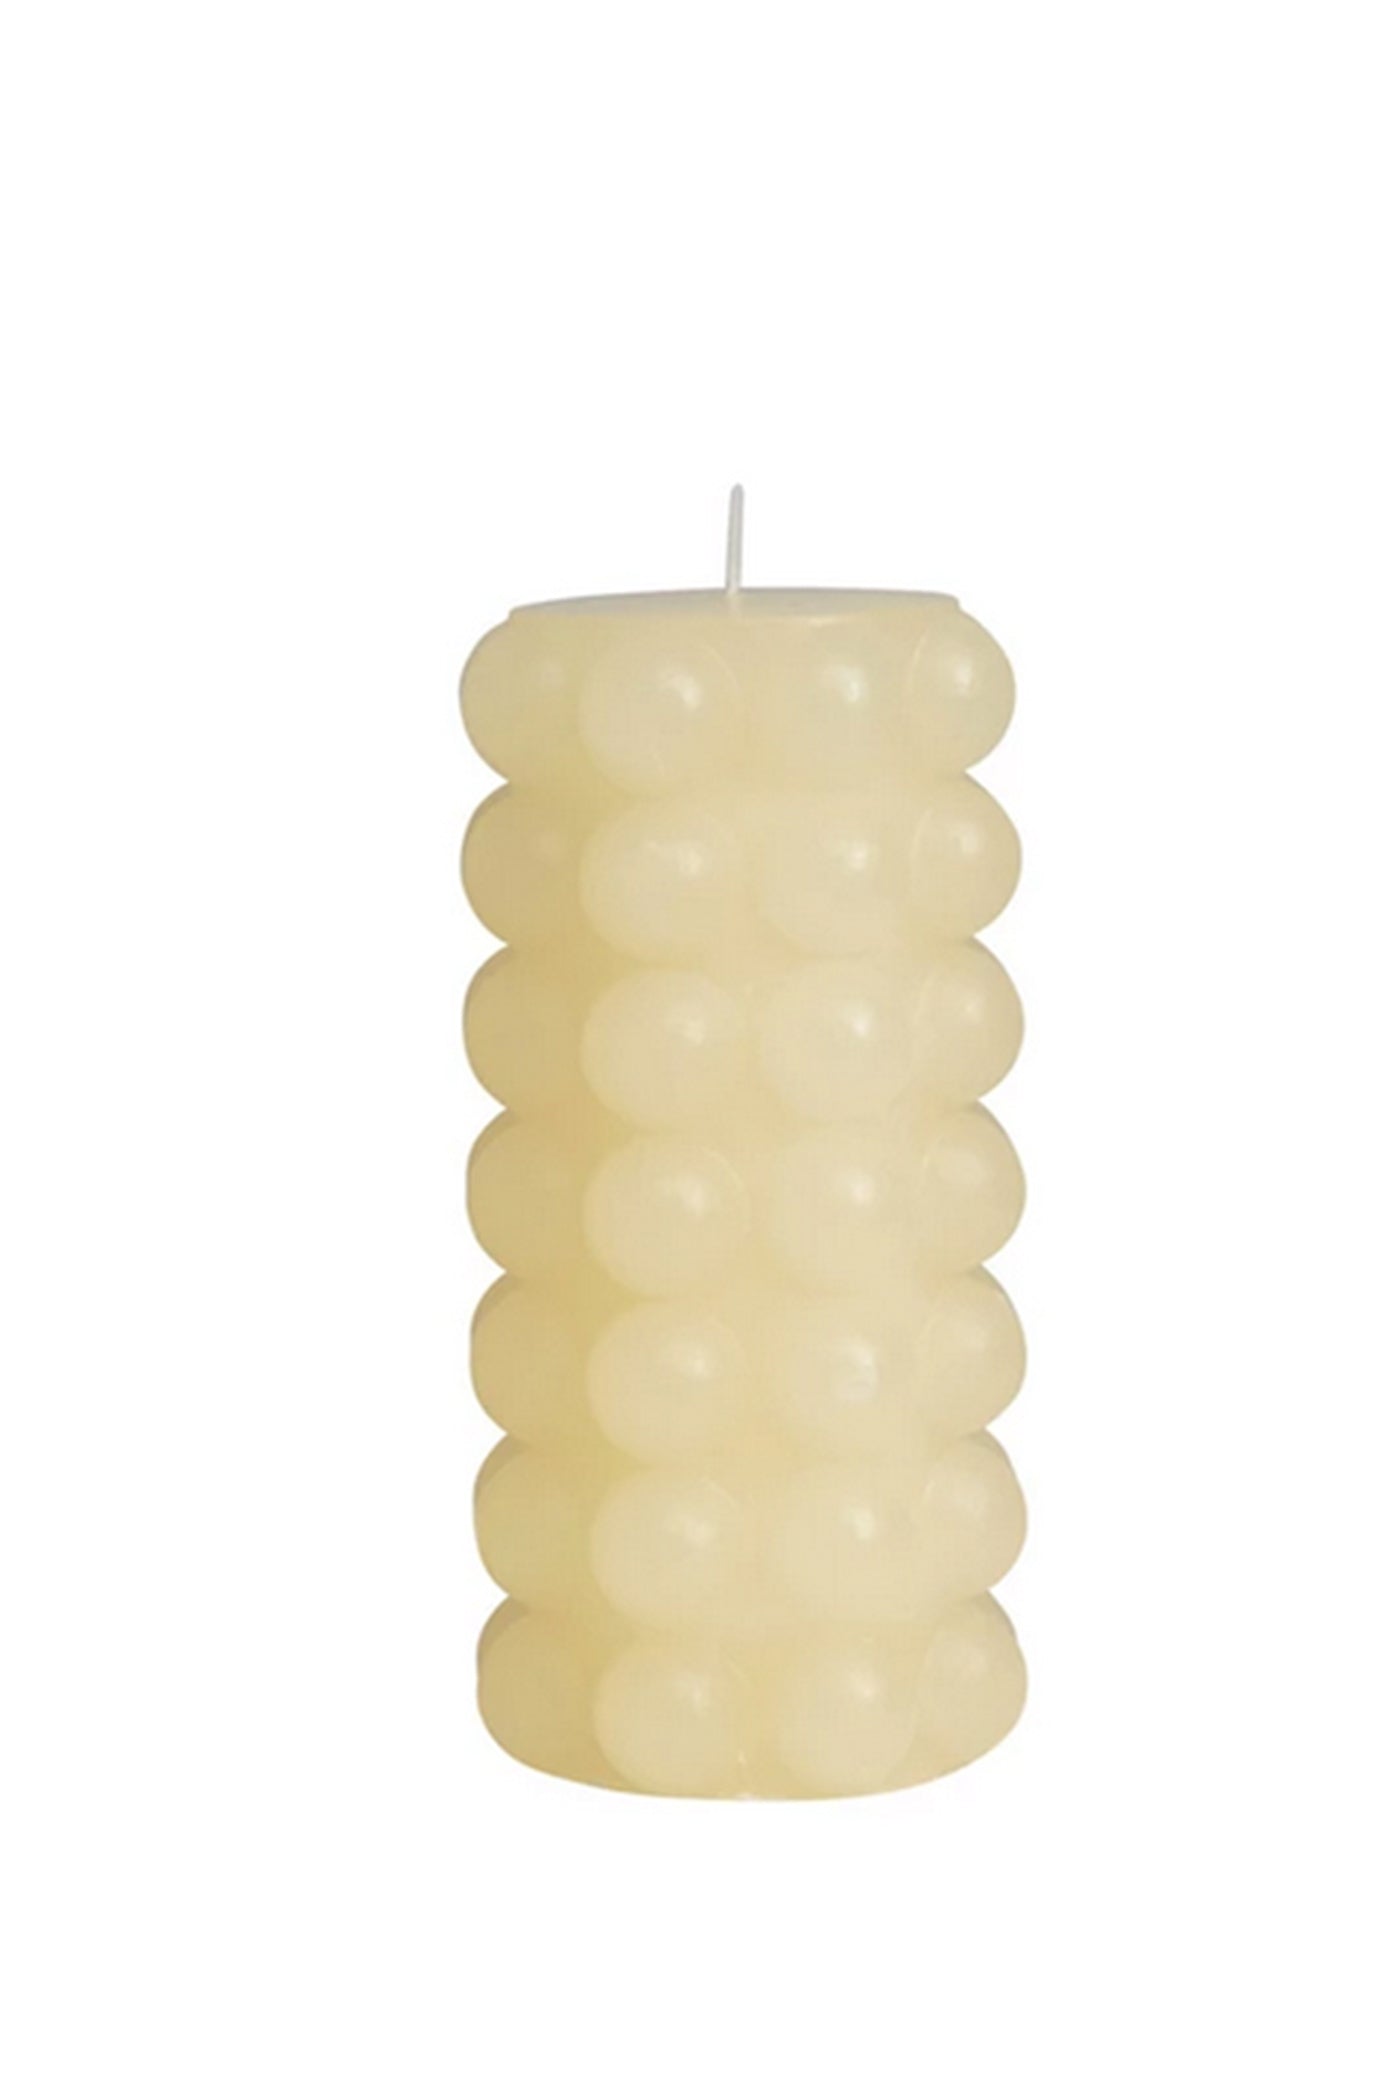 Unscented Hobnail Piller Candle-Cream